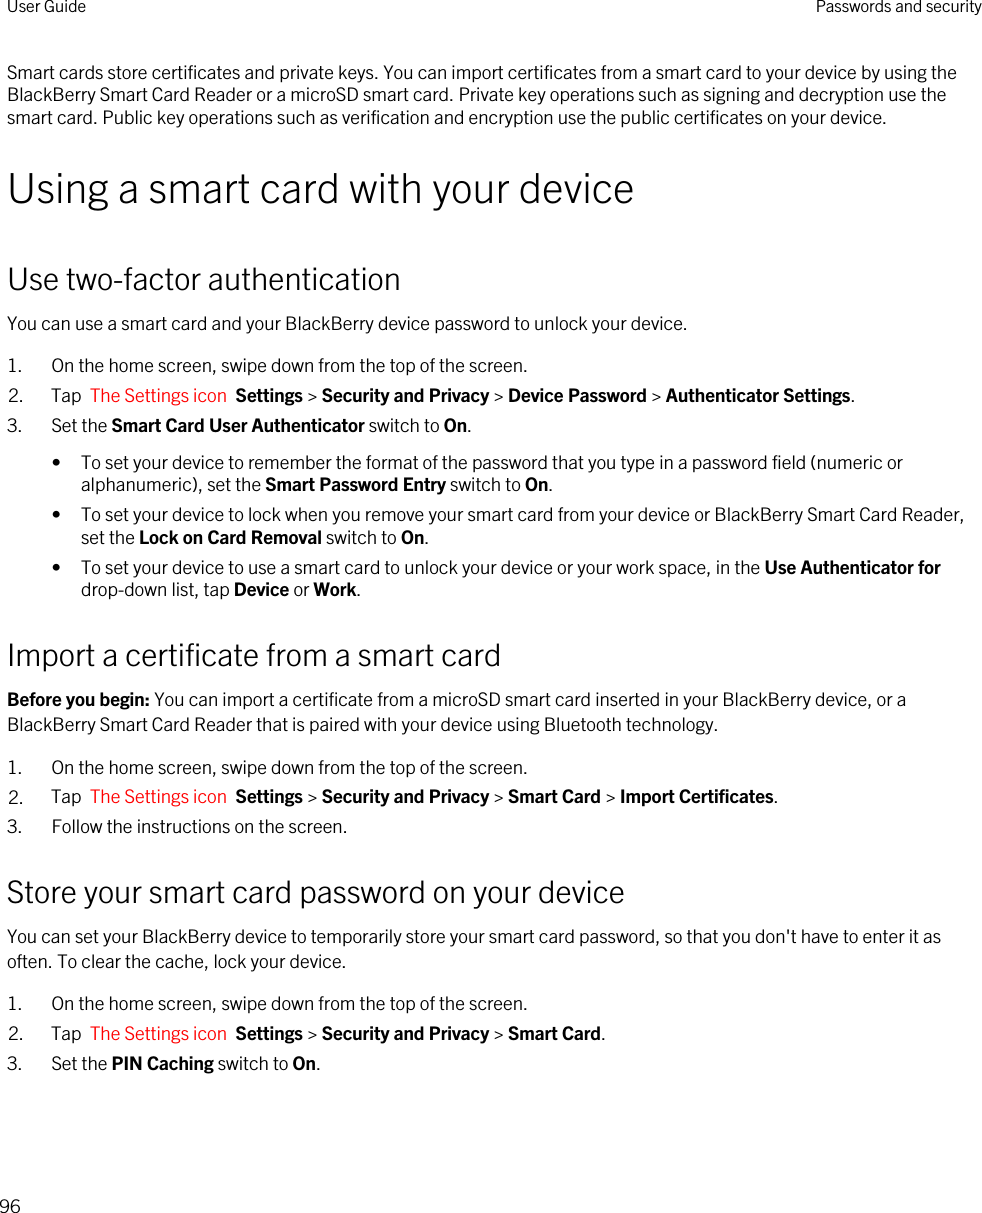 Smart cards store certificates and private keys. You can import certificates from a smart card to your device by using the BlackBerry Smart Card Reader or a microSD smart card. Private key operations such as signing and decryption use the smart card. Public key operations such as verification and encryption use the public certificates on your device.Using a smart card with your deviceUse two-factor authenticationYou can use a smart card and your BlackBerry device password to unlock your device.1. On the home screen, swipe down from the top of the screen.2. Tap  The Settings icon  Settings &gt; Security and Privacy &gt; Device Password &gt; Authenticator Settings.3. Set the Smart Card User Authenticator switch to On.• To set your device to remember the format of the password that you type in a password field (numeric or alphanumeric), set the Smart Password Entry switch to On.• To set your device to lock when you remove your smart card from your device or BlackBerry Smart Card Reader, set the Lock on Card Removal switch to On.• To set your device to use a smart card to unlock your device or your work space, in the Use Authenticator for drop-down list, tap Device or Work.Import a certificate from a smart cardBefore you begin: You can import a certificate from a microSD smart card inserted in your BlackBerry device, or a BlackBerry Smart Card Reader that is paired with your device using Bluetooth technology.1. On the home screen, swipe down from the top of the screen.2. Tap  The Settings icon  Settings &gt; Security and Privacy &gt; Smart Card &gt; Import Certificates.3. Follow the instructions on the screen.Store your smart card password on your deviceYou can set your BlackBerry device to temporarily store your smart card password, so that you don&apos;t have to enter it as often. To clear the cache, lock your device.1. On the home screen, swipe down from the top of the screen.2. Tap  The Settings icon  Settings &gt; Security and Privacy &gt; Smart Card.3. Set the PIN Caching switch to On.User Guide Passwords and security96